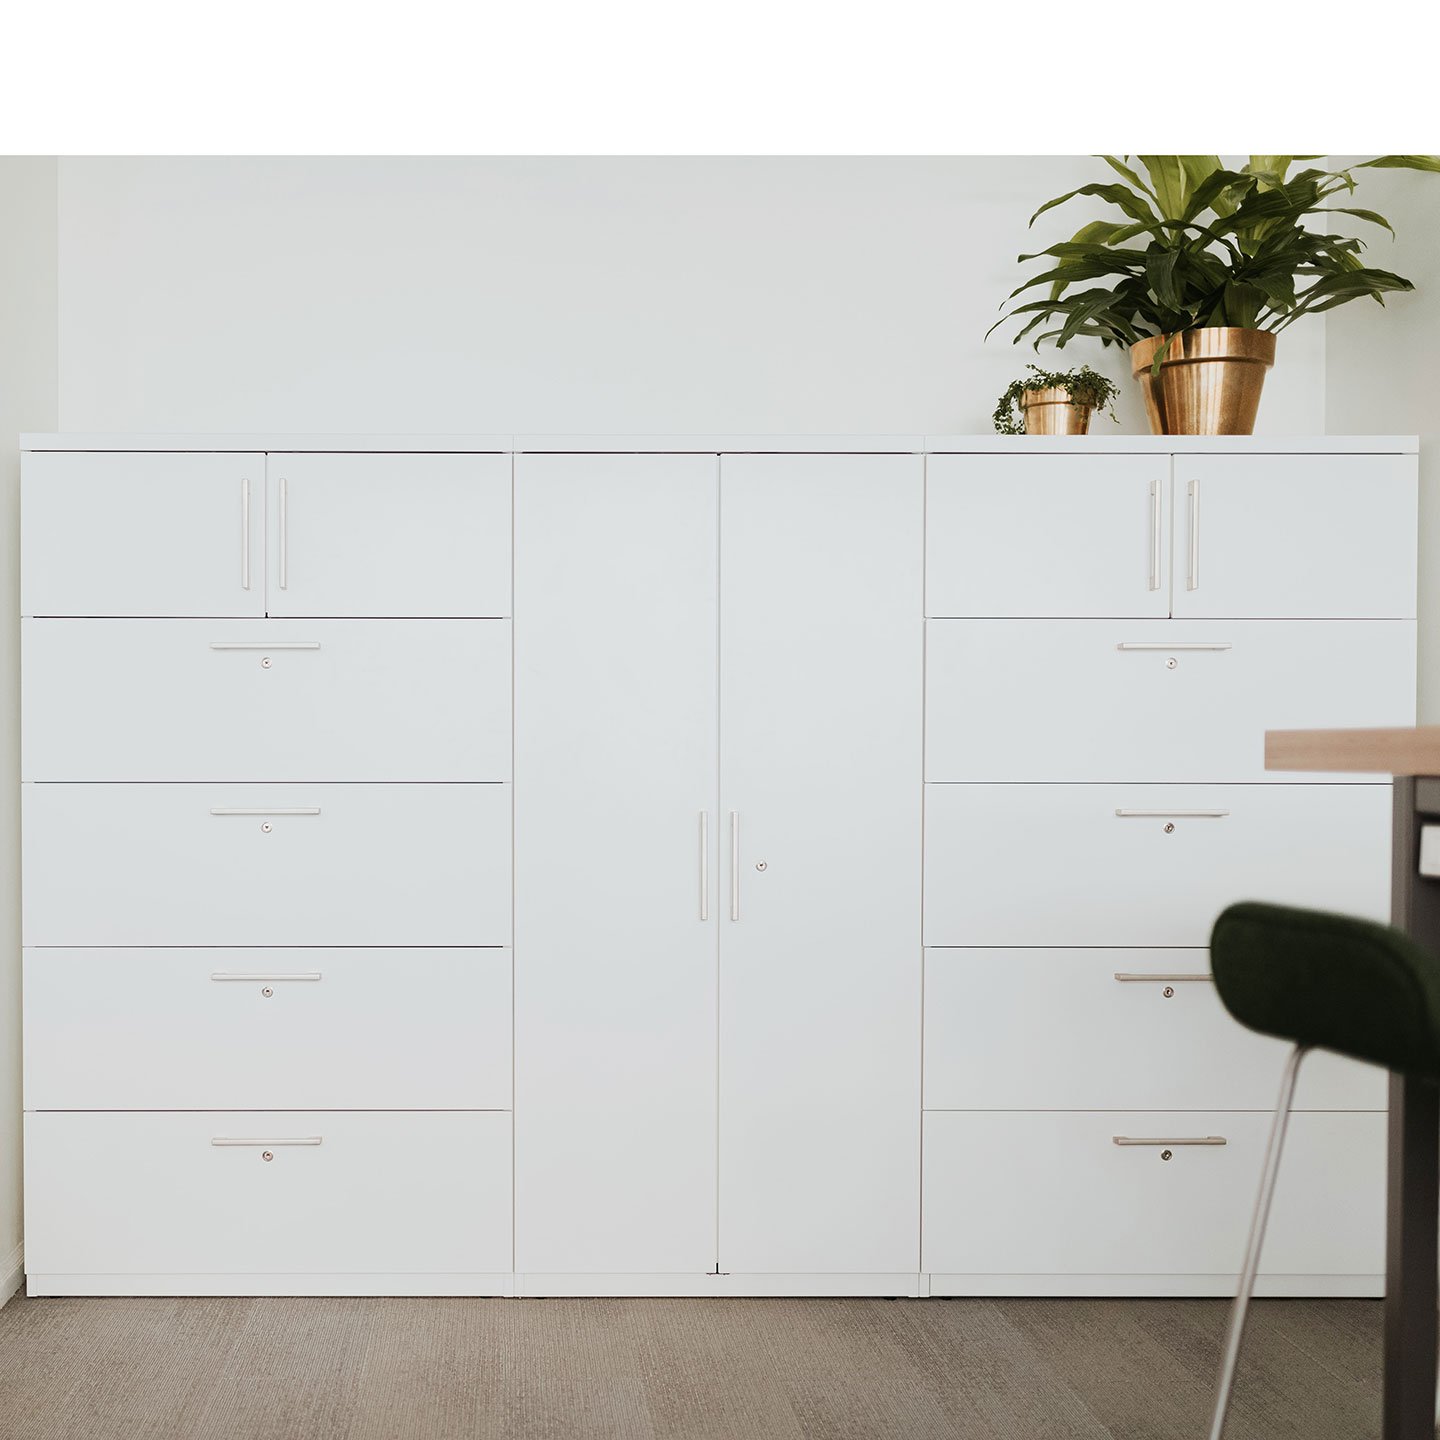 X Series storage unit in white with drawers and hinge door cabinets